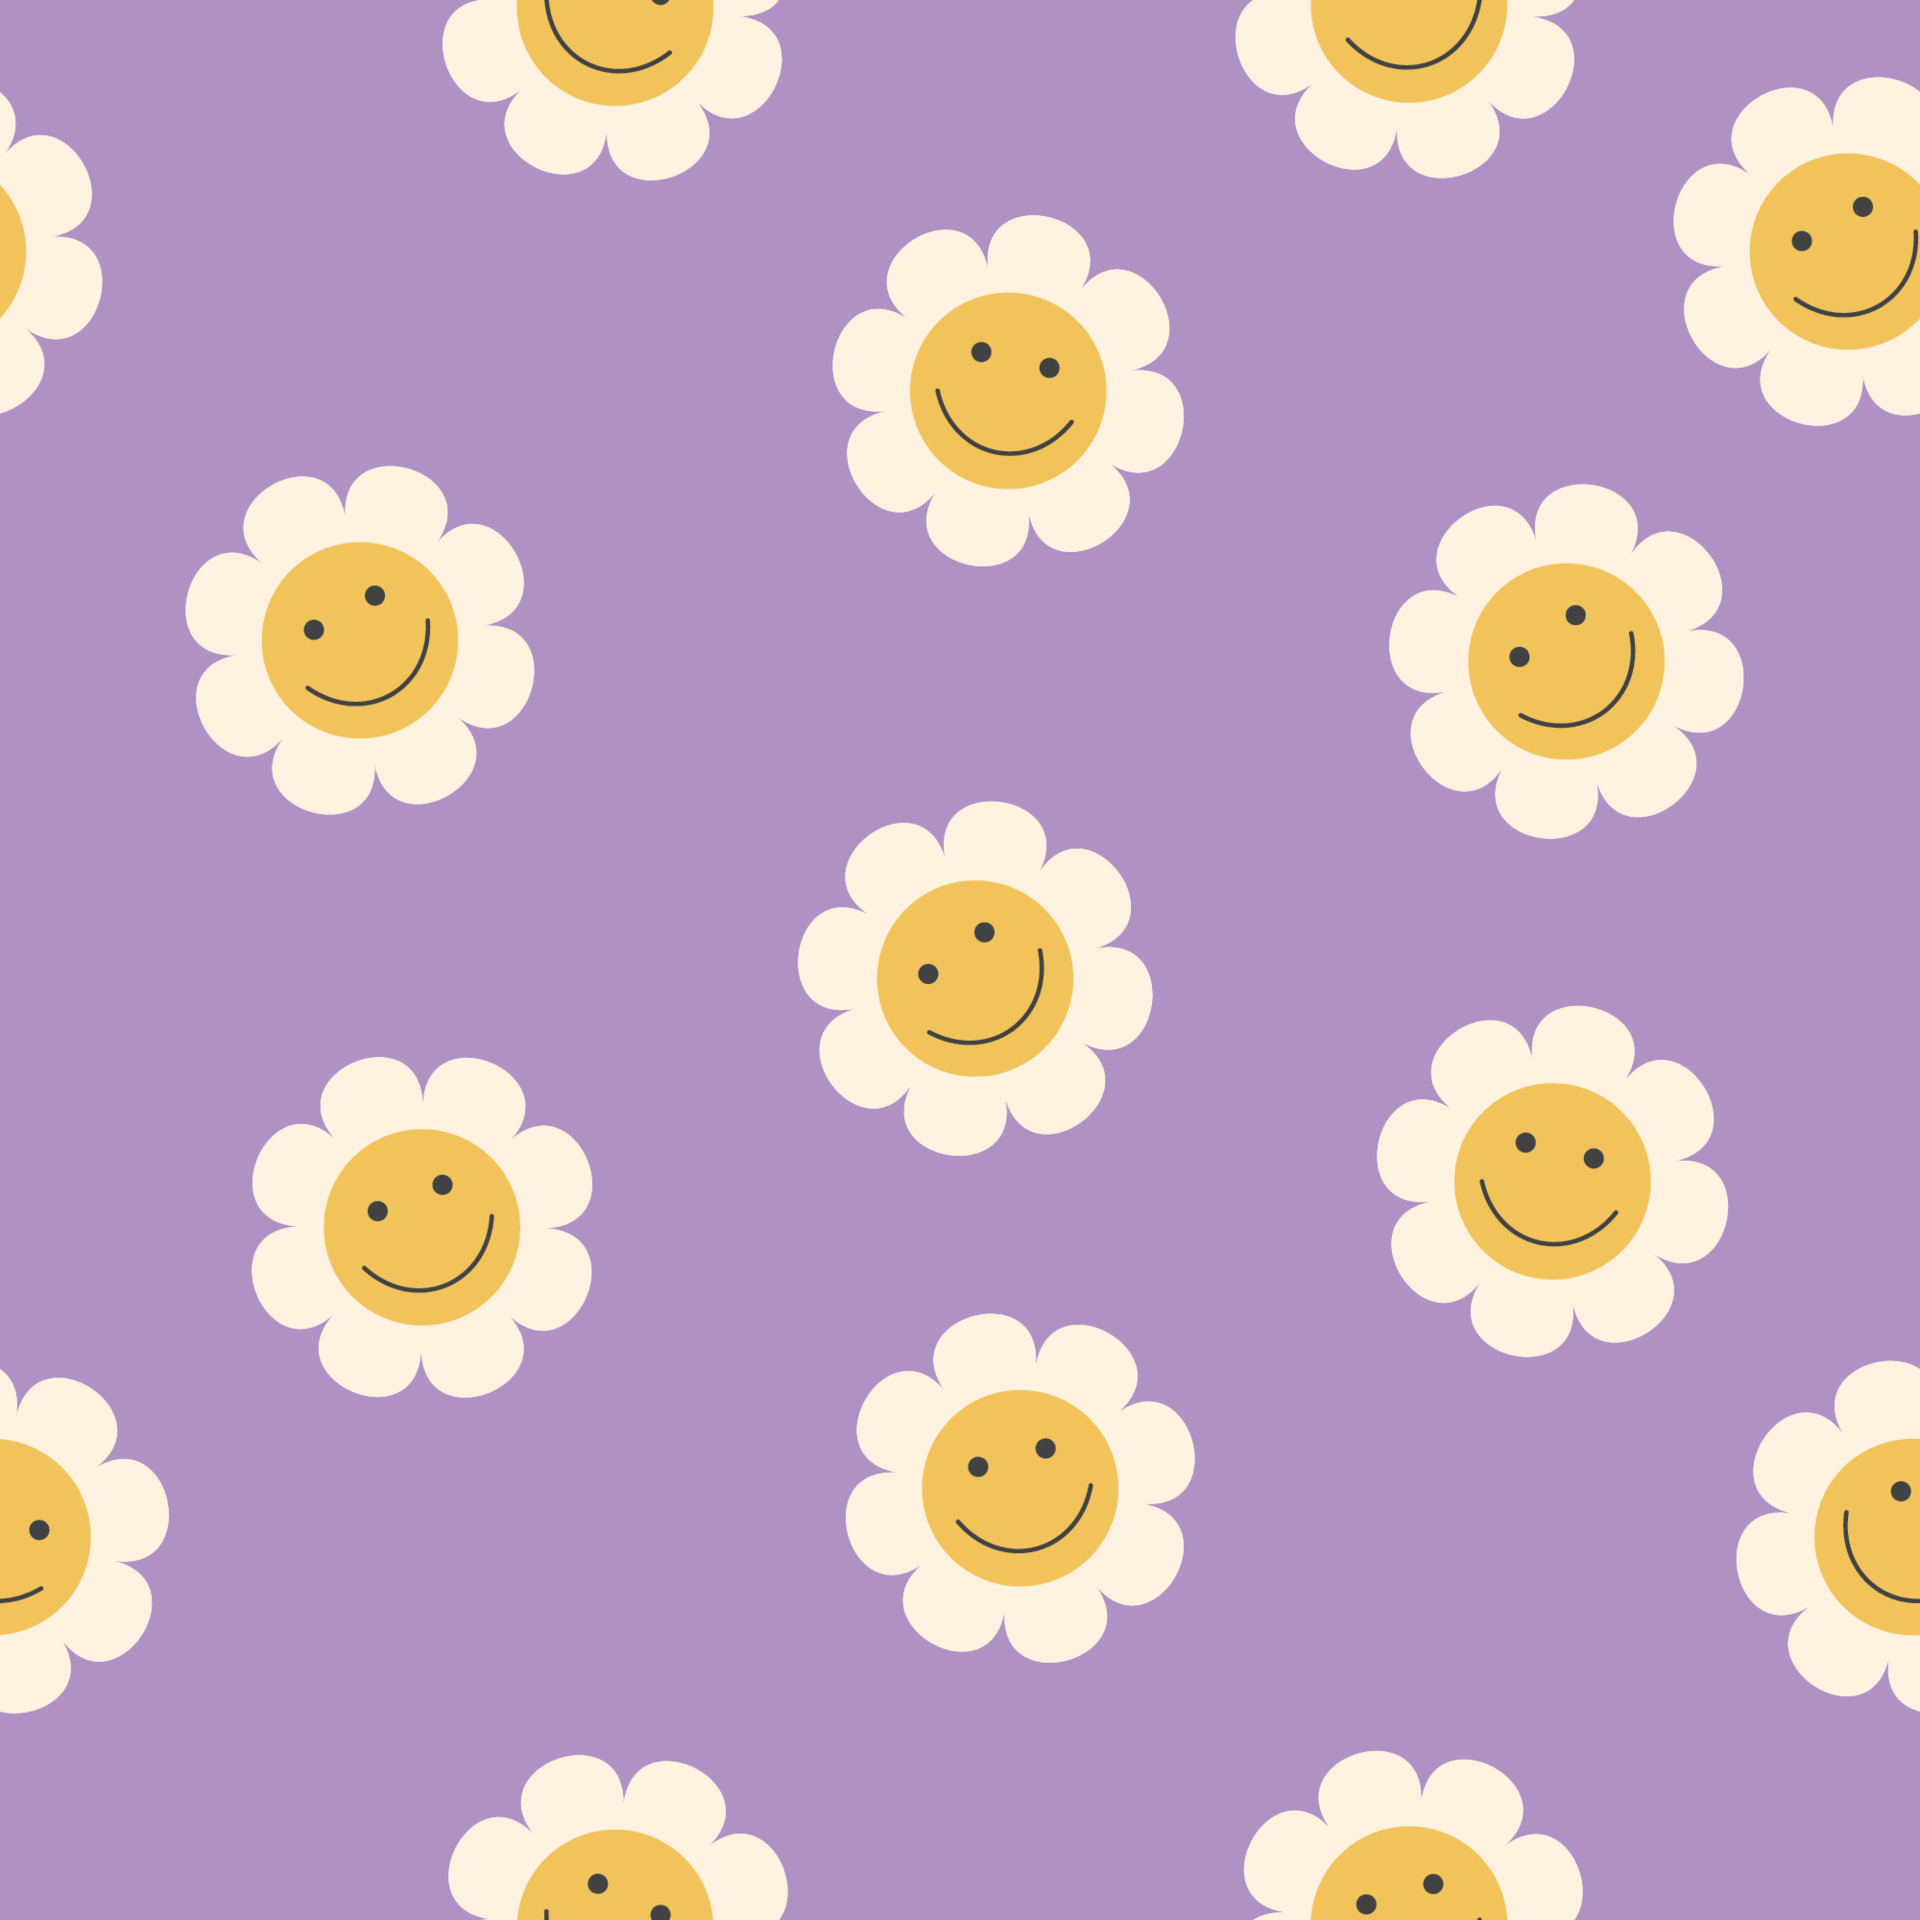 Premium Vector  Checkered seamless pattern with cute smiling flowers and  hearts vector image